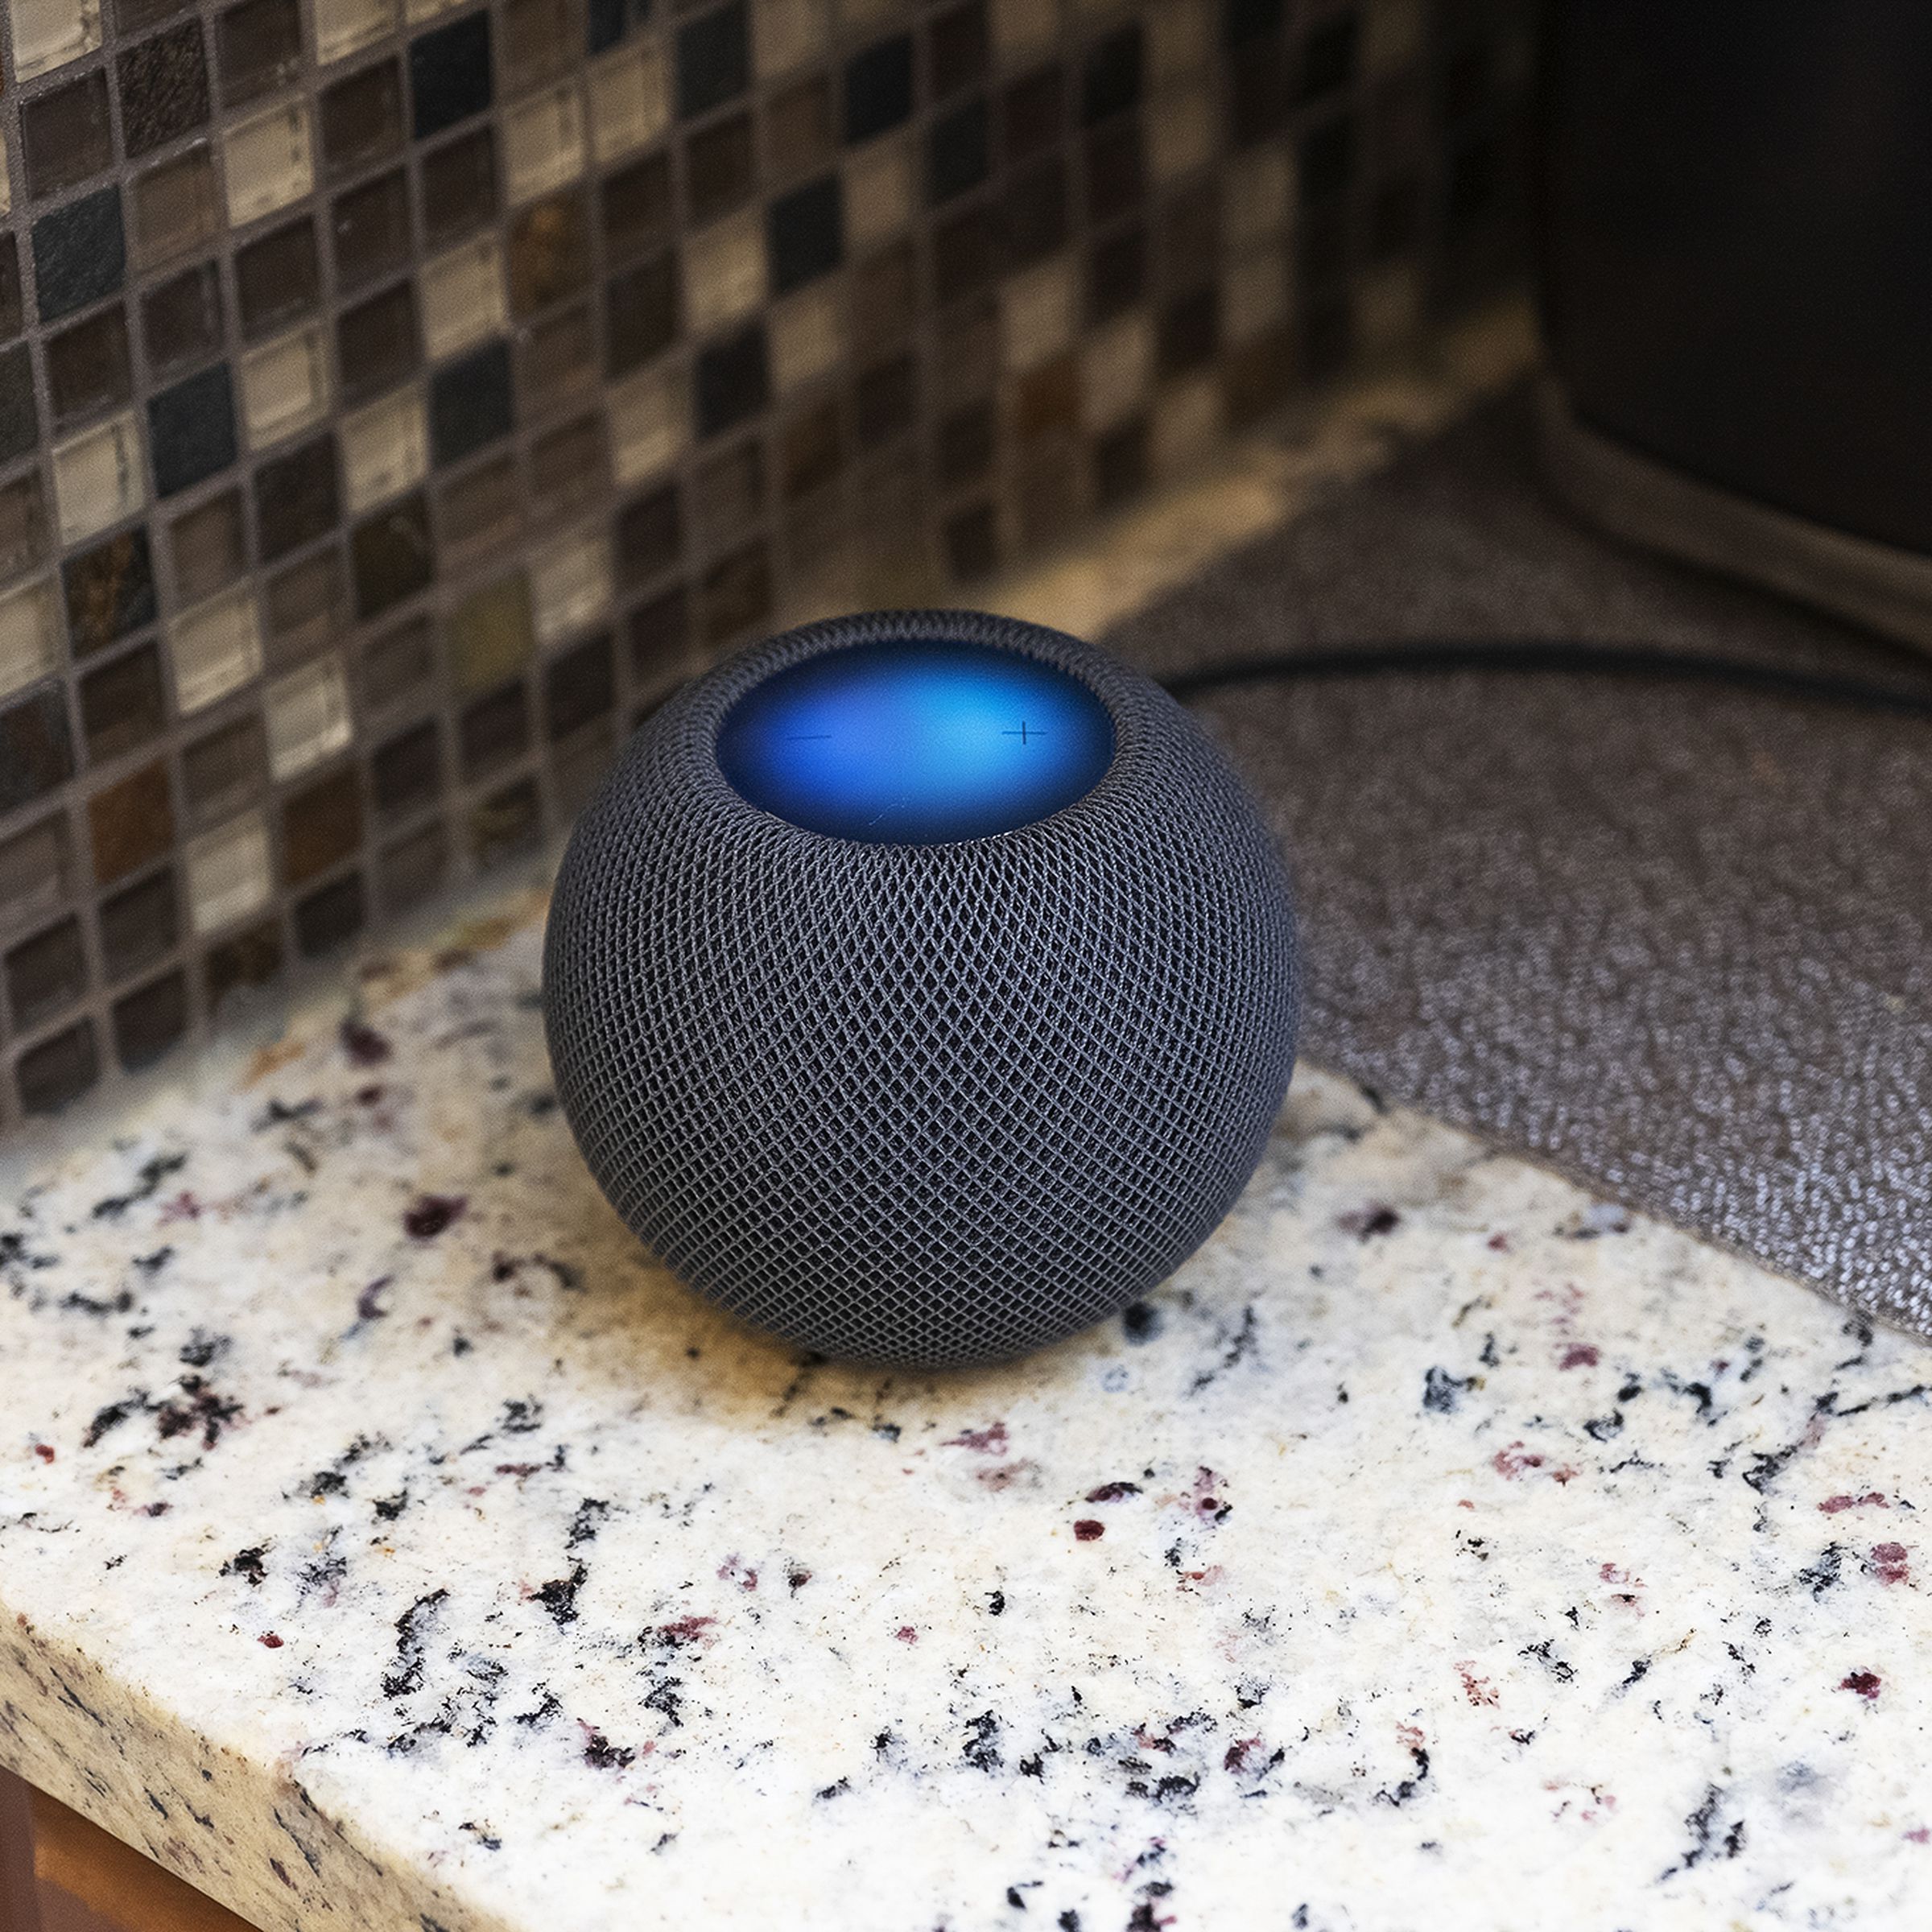 The Apple HomePod Mini sitting on a countertop